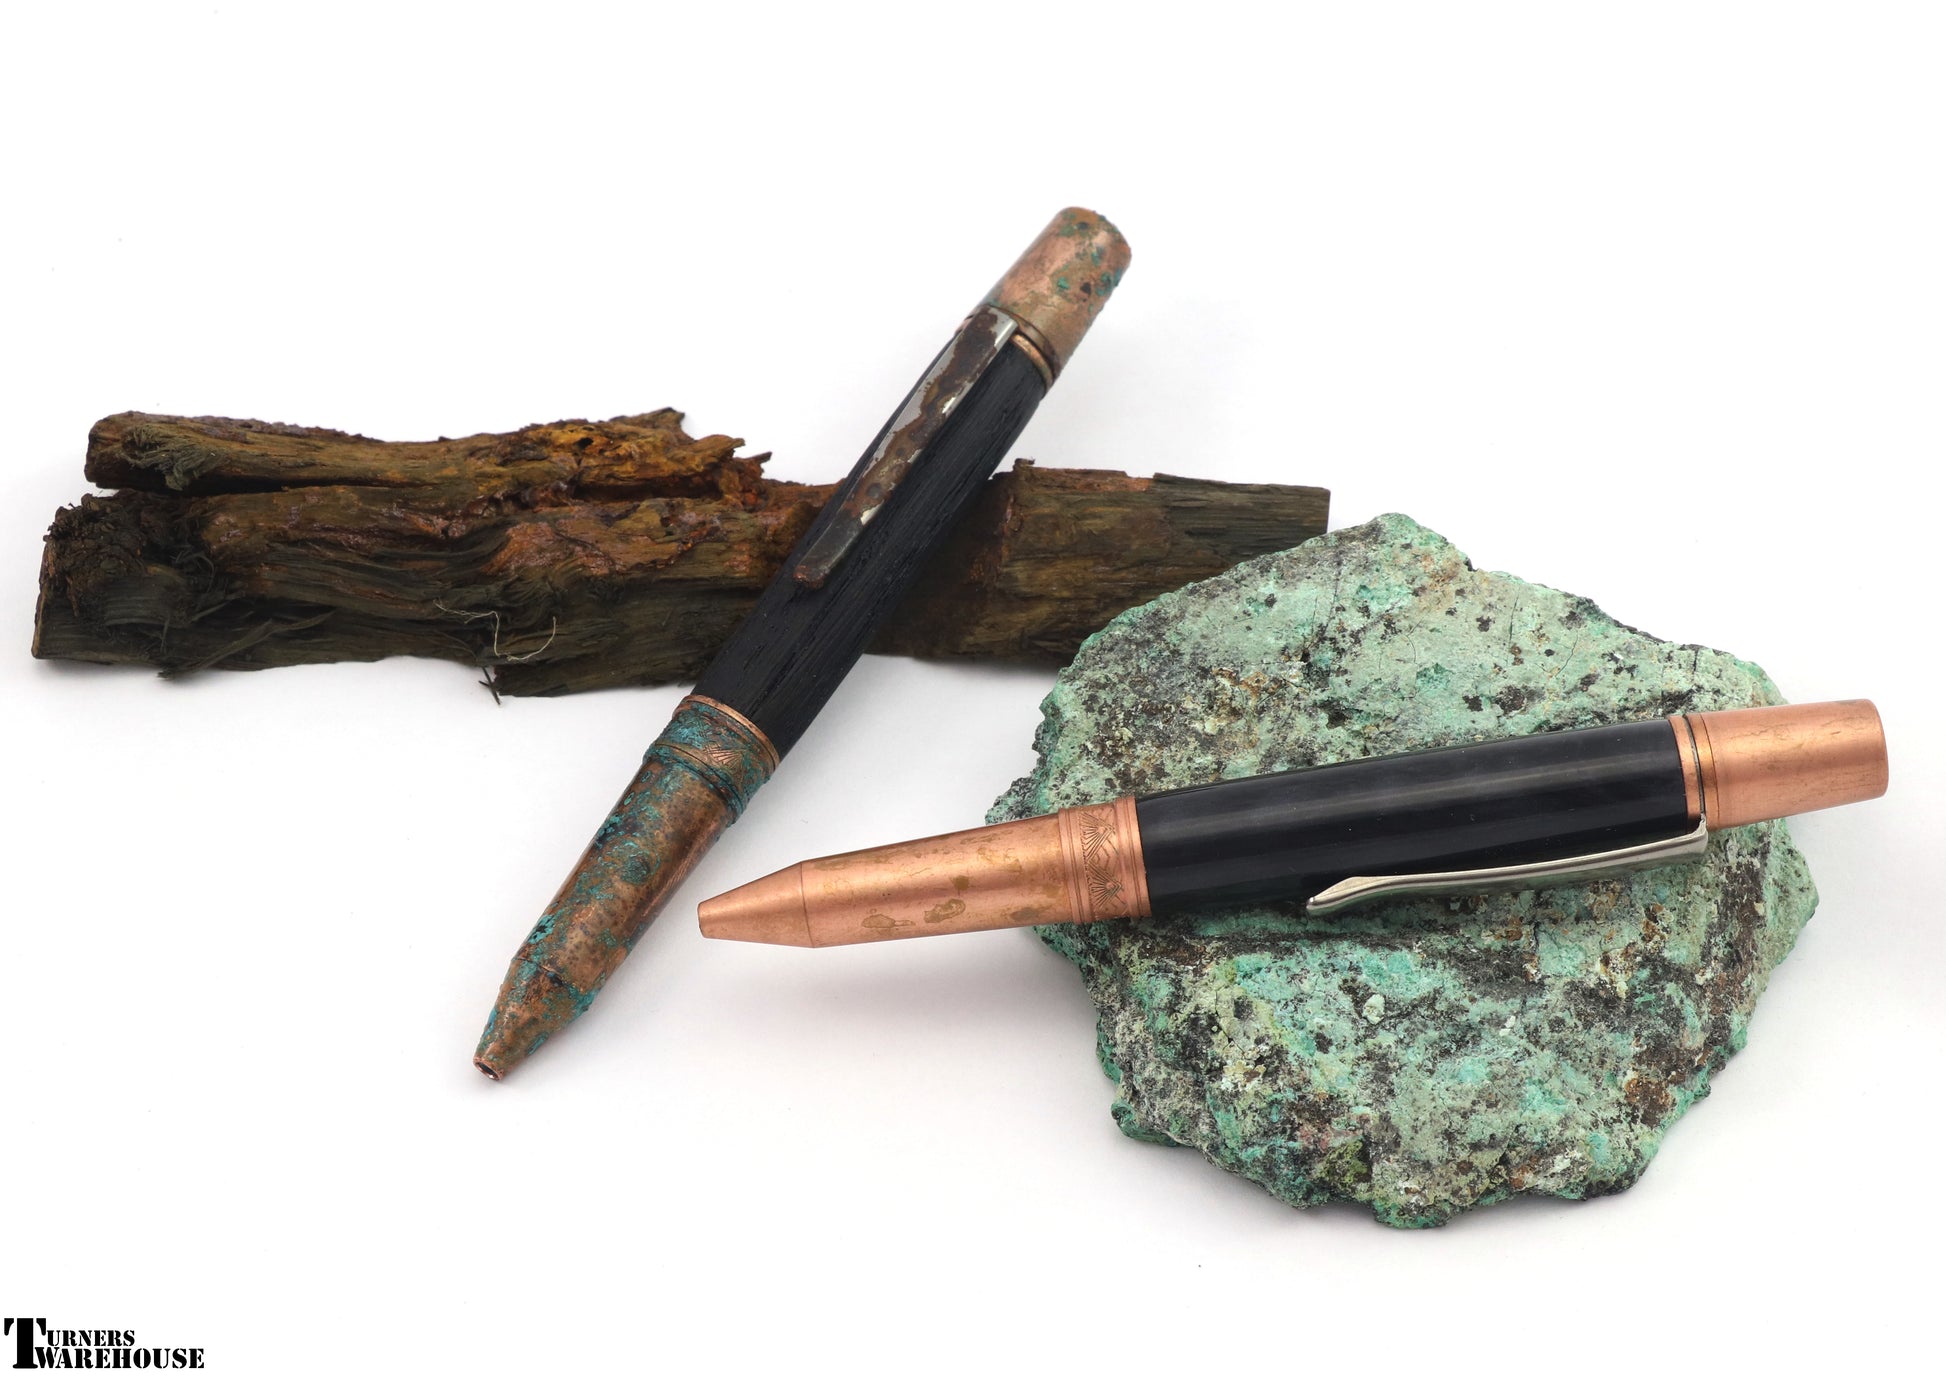 Element Series Twist Pen Kit Raw Copper and Patina Copper